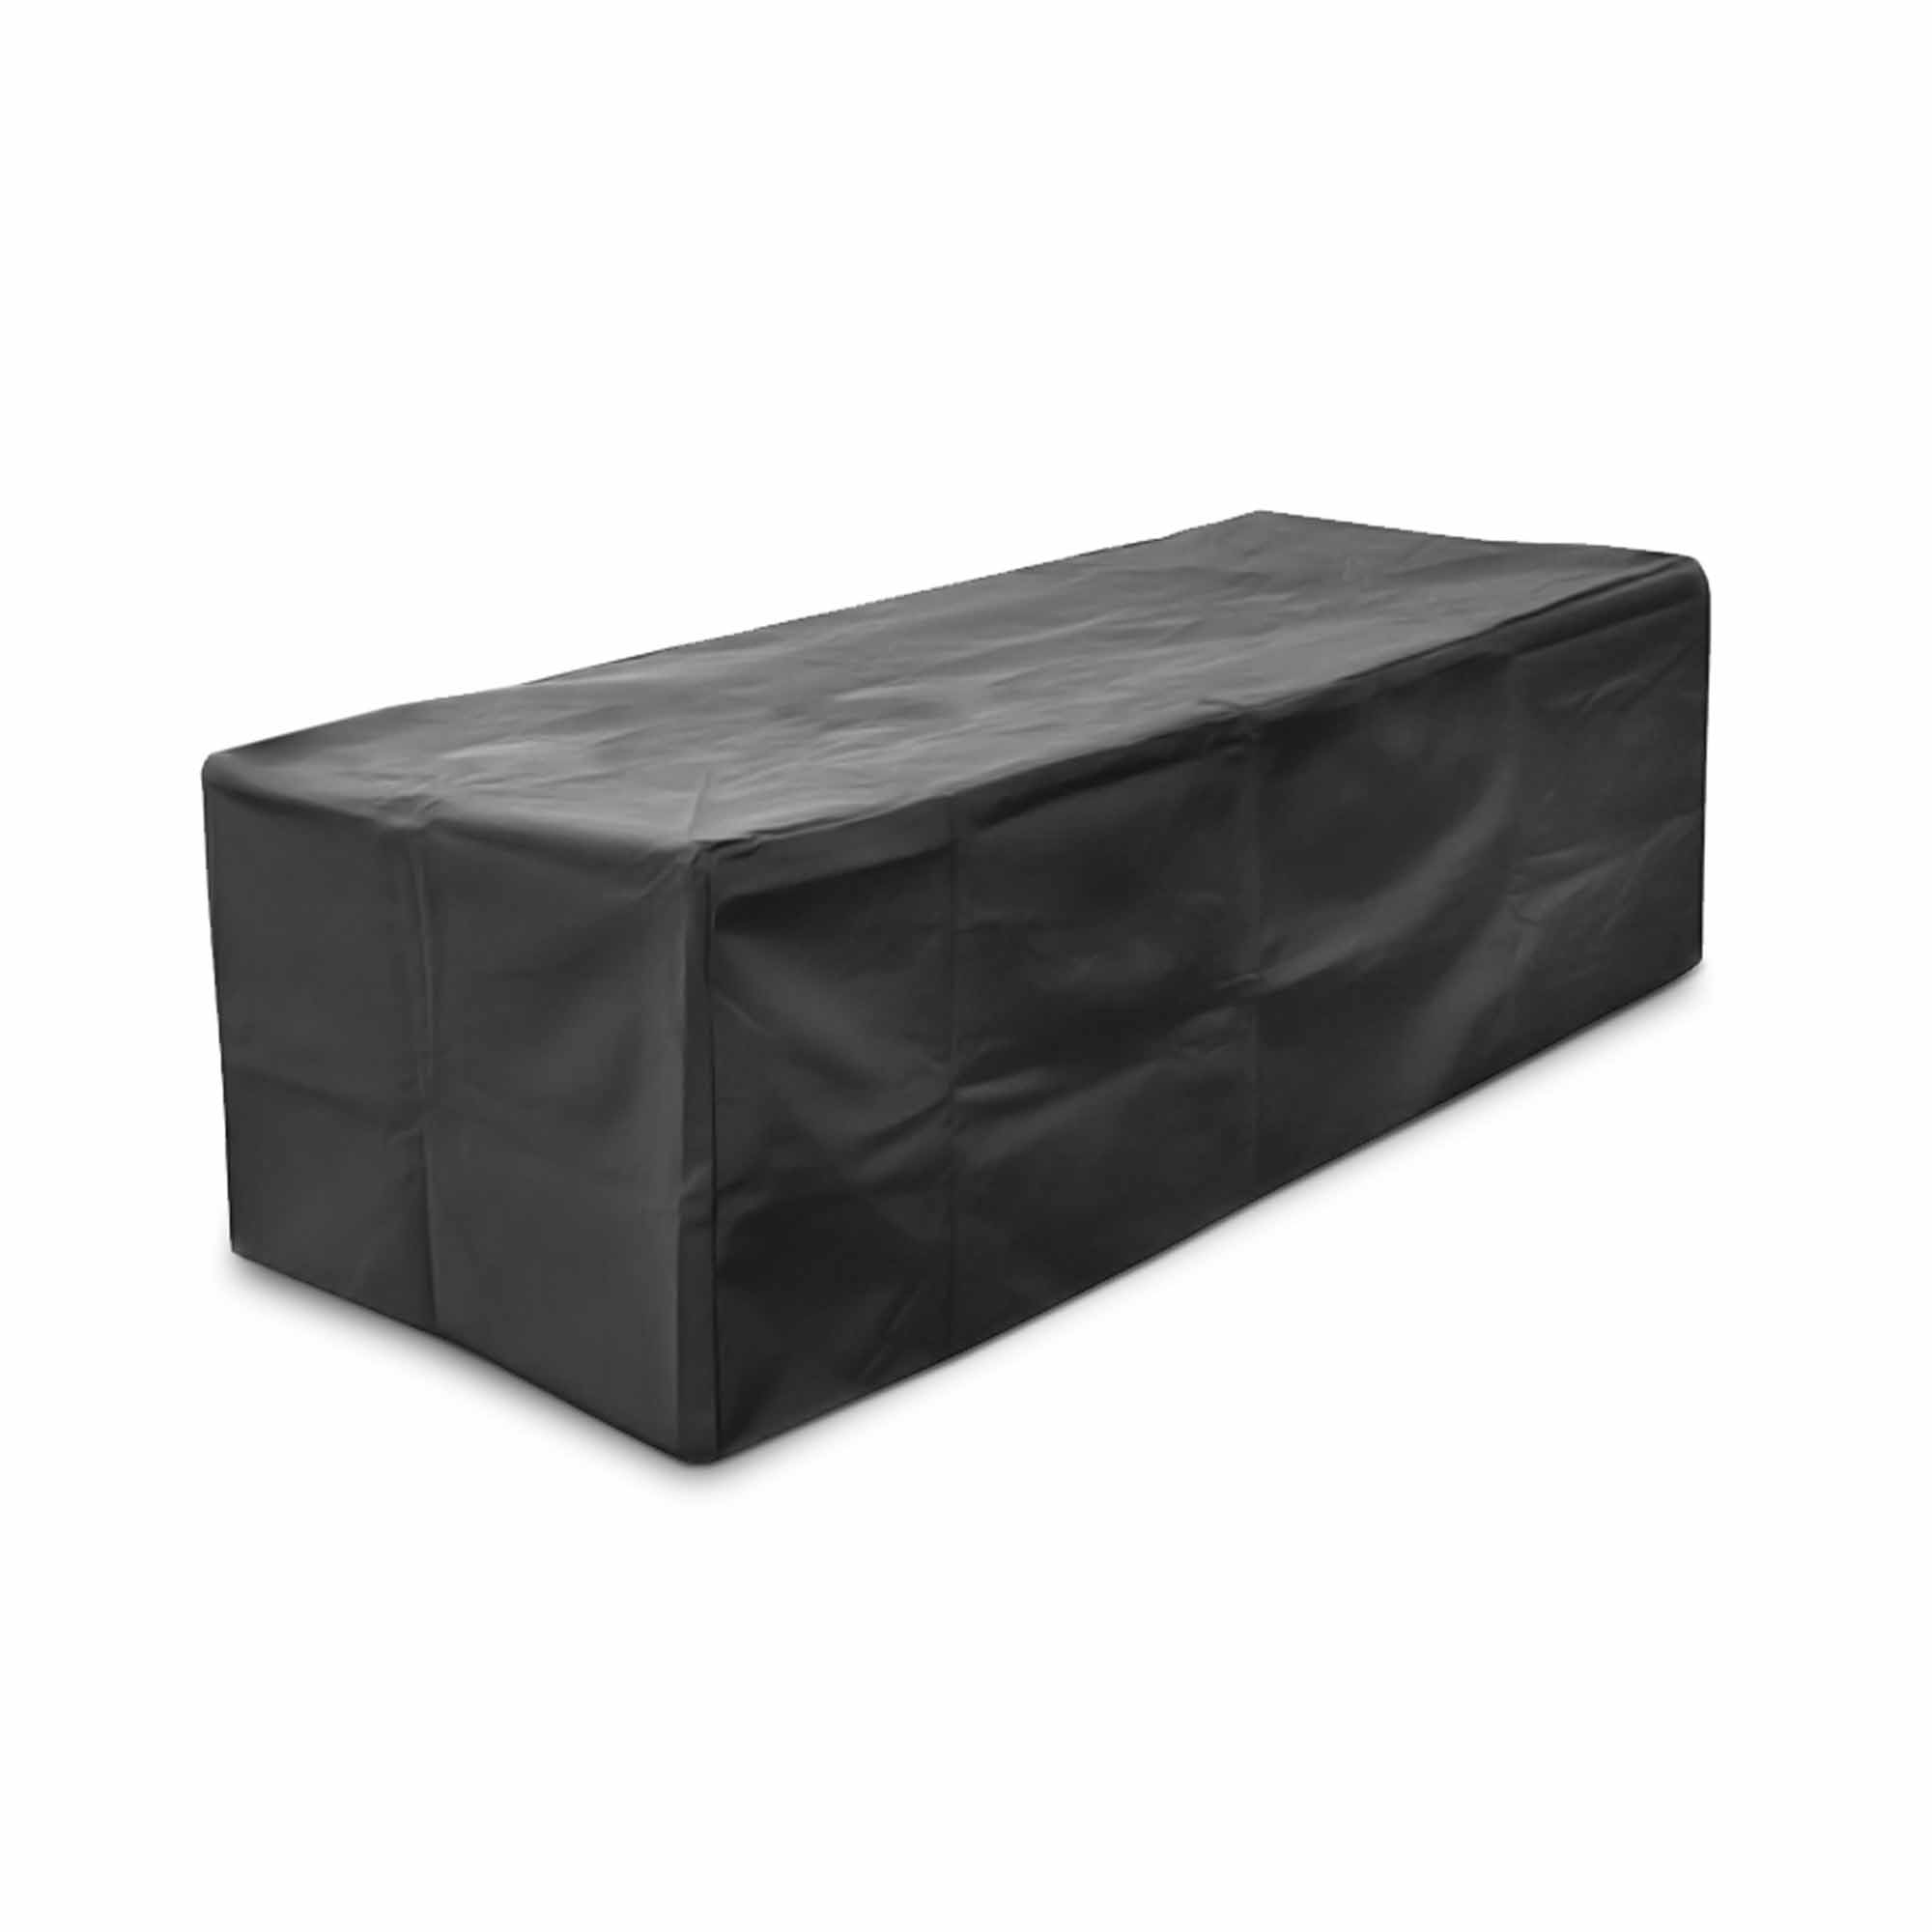 Rectangular Fire Pit Covers The, Rectangle Fire Pit Cover